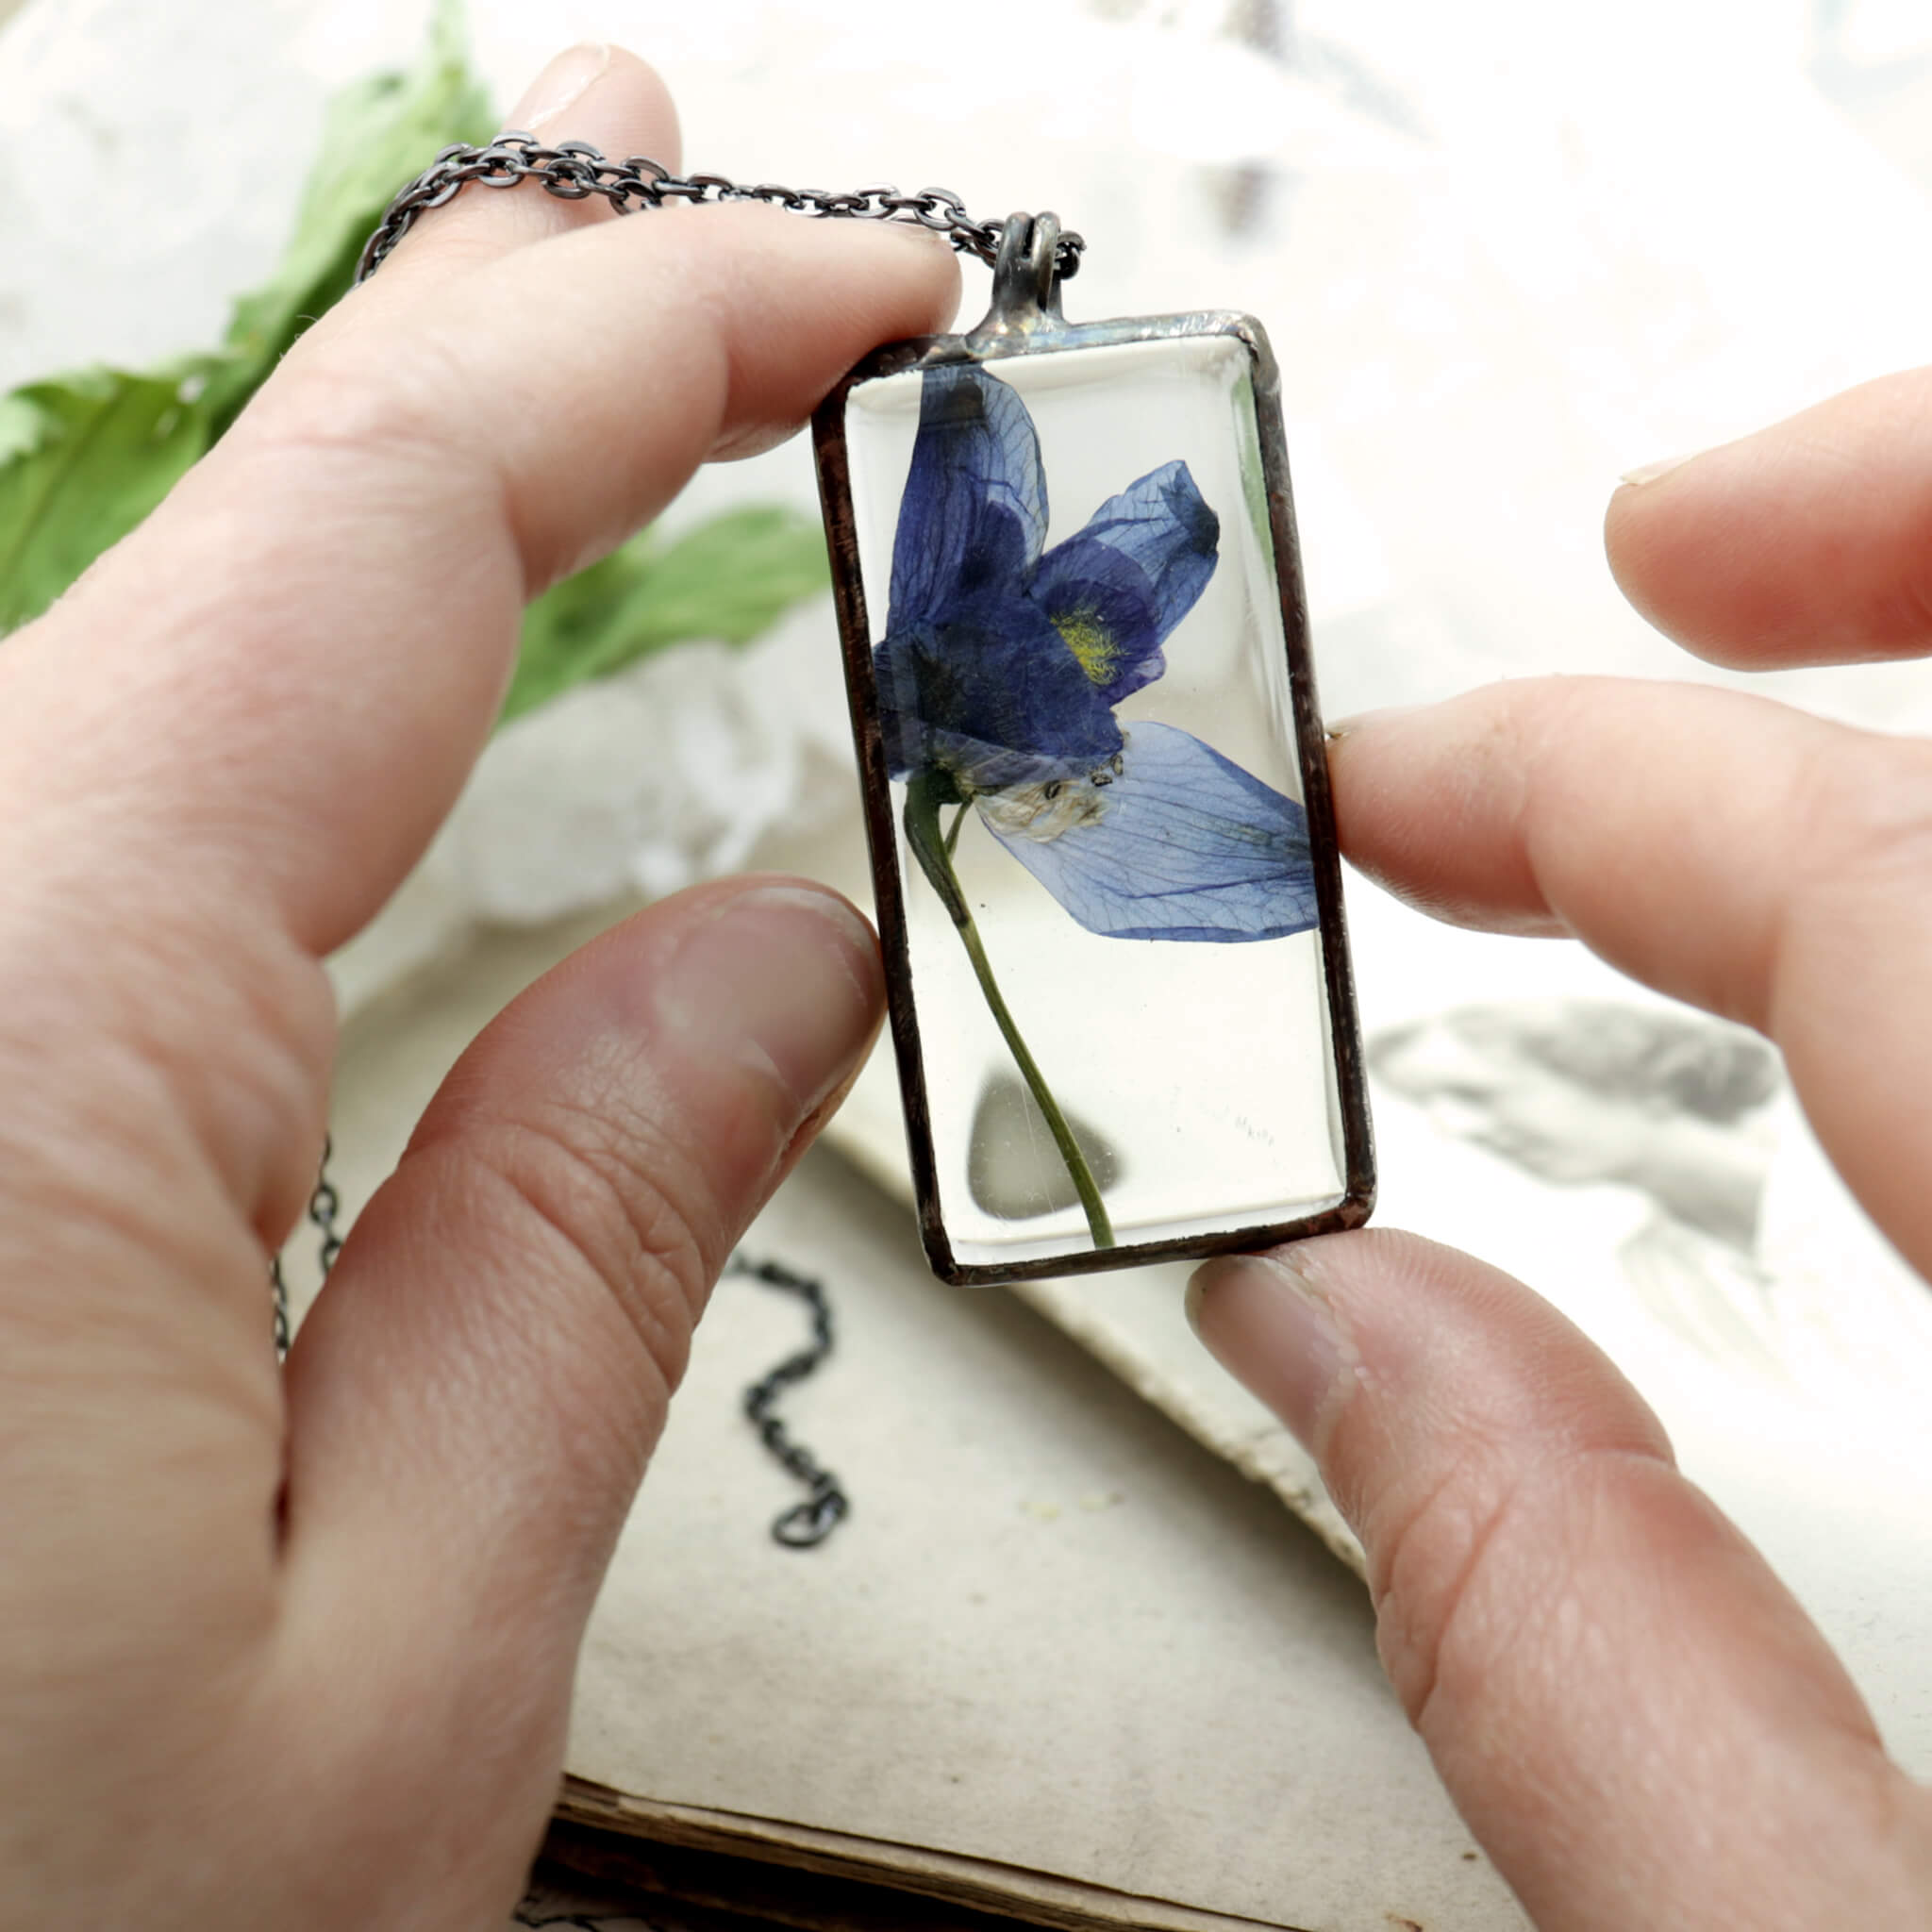 Hands holding a blue pressed flower in a rectangular glass soldered necklace